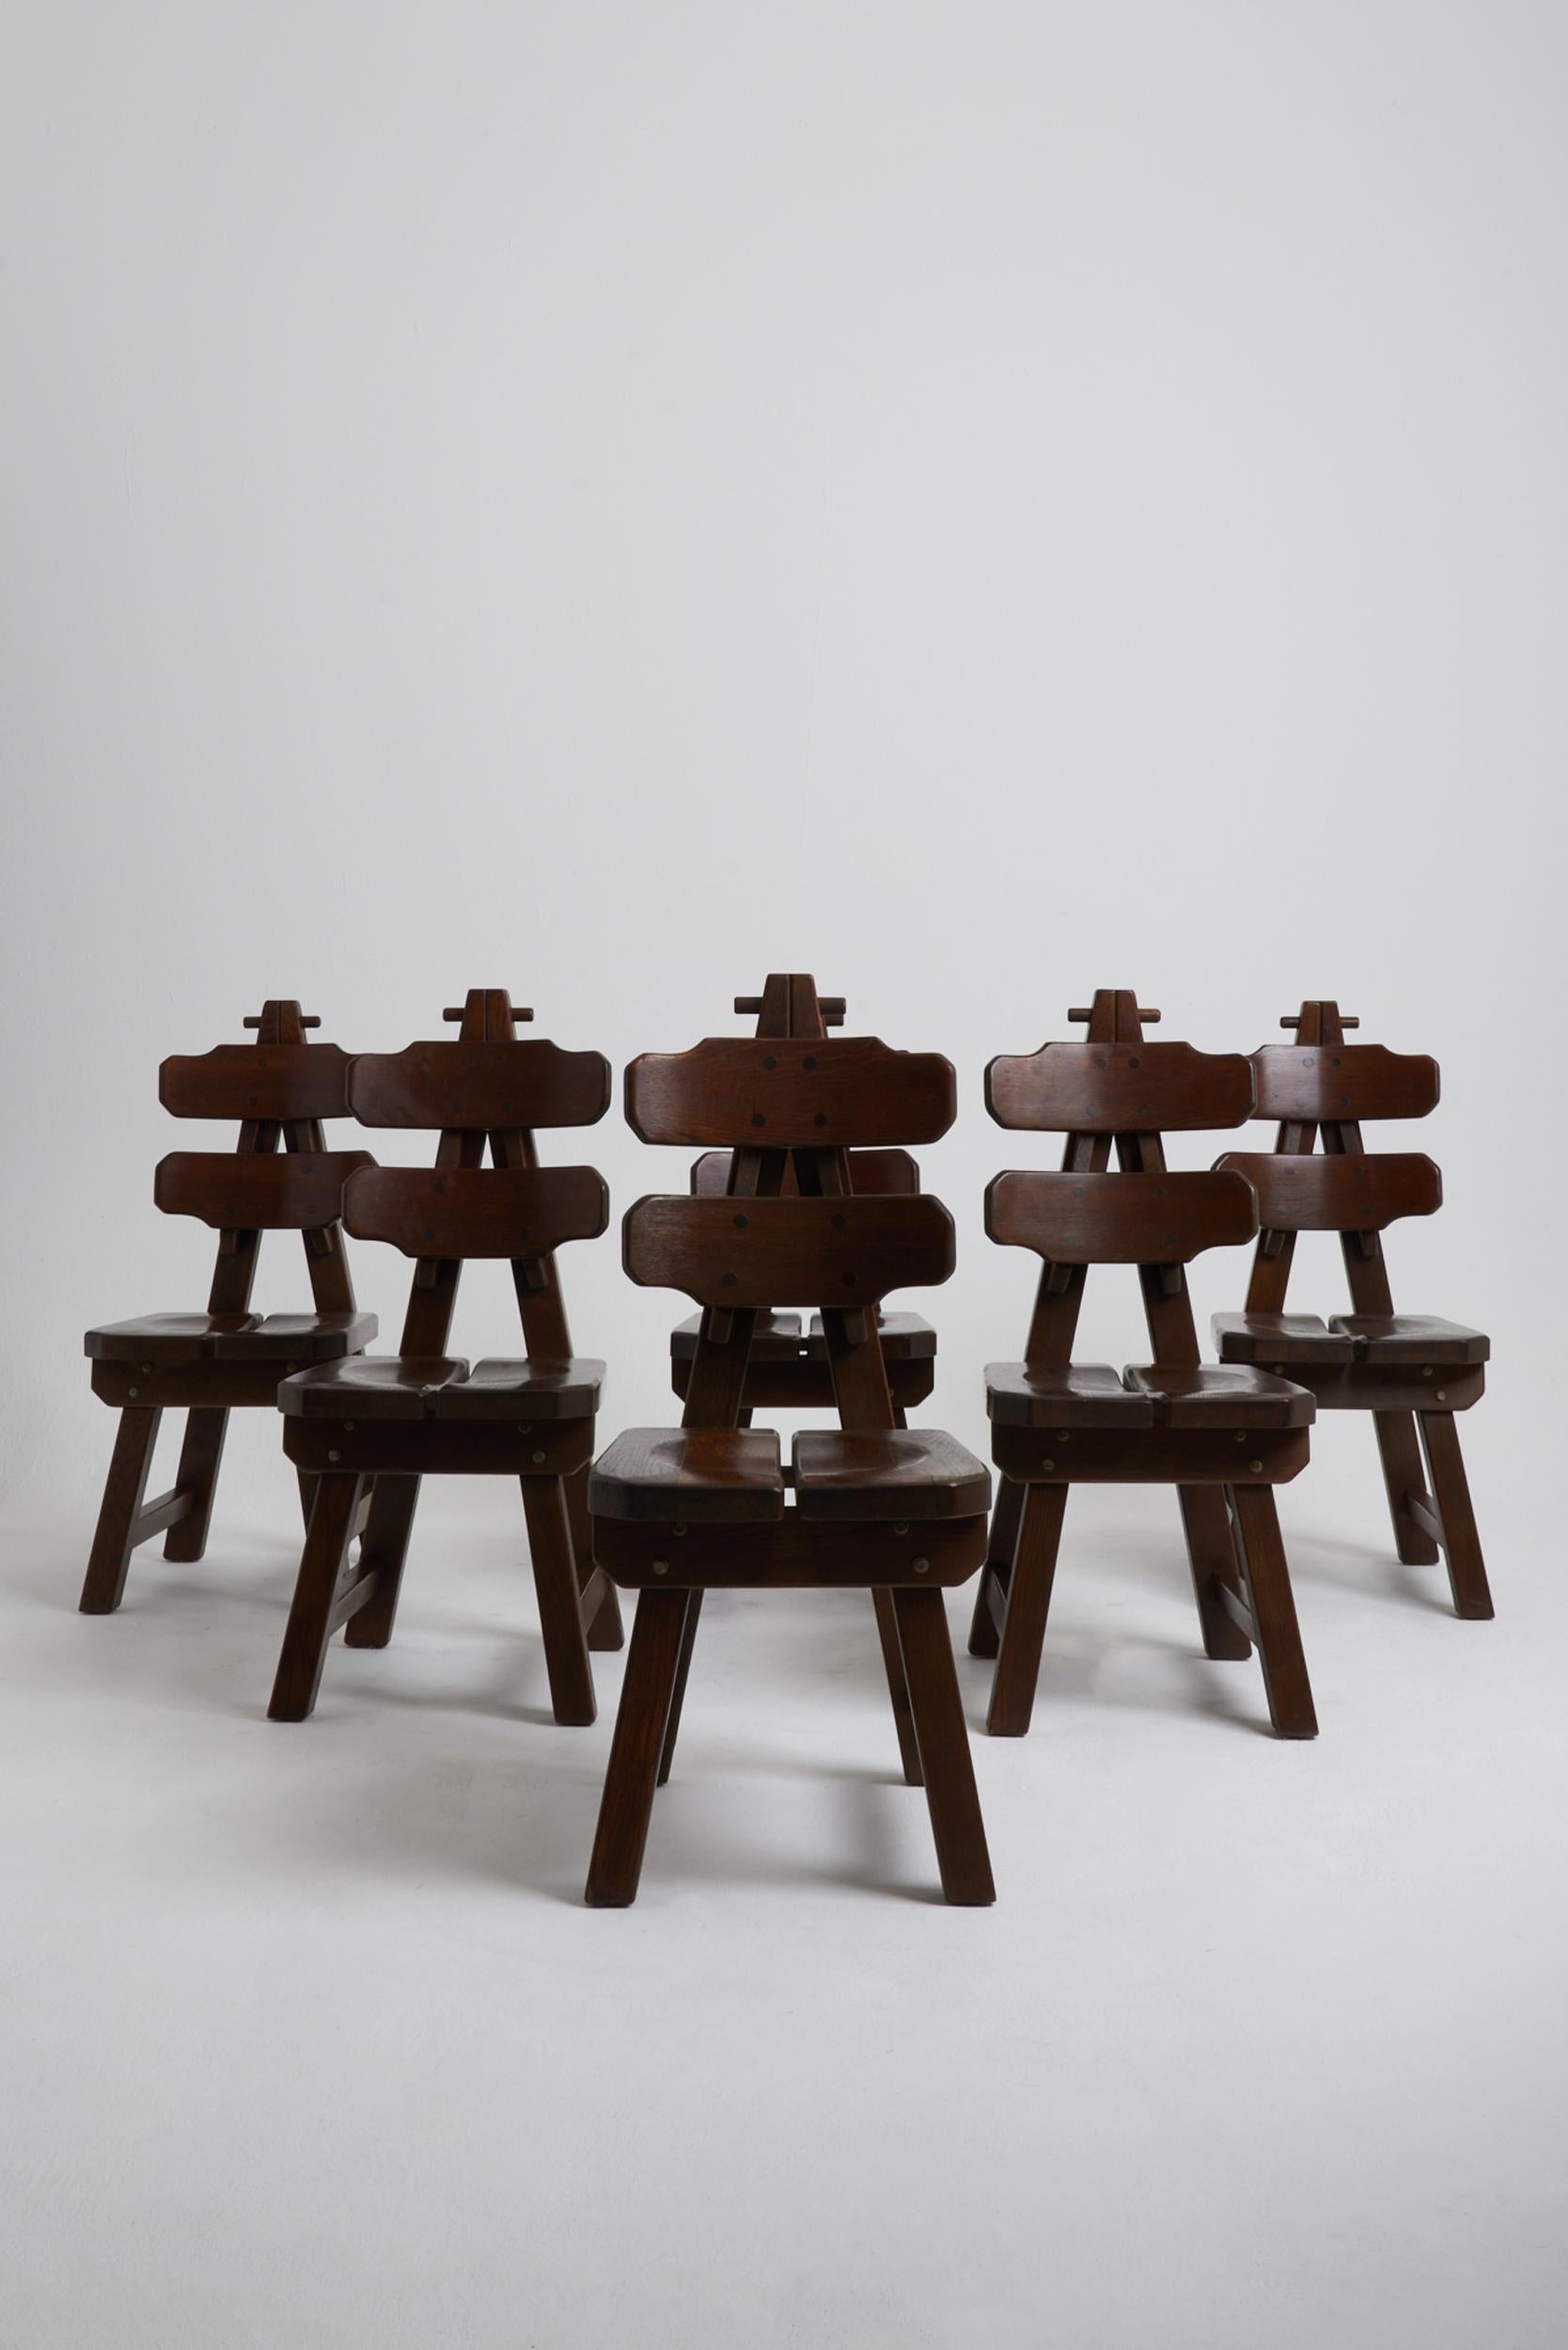 A set of six Brutalist solid oak dining chairs. Beautifully constructed.
France, third quarter of the 20th century.